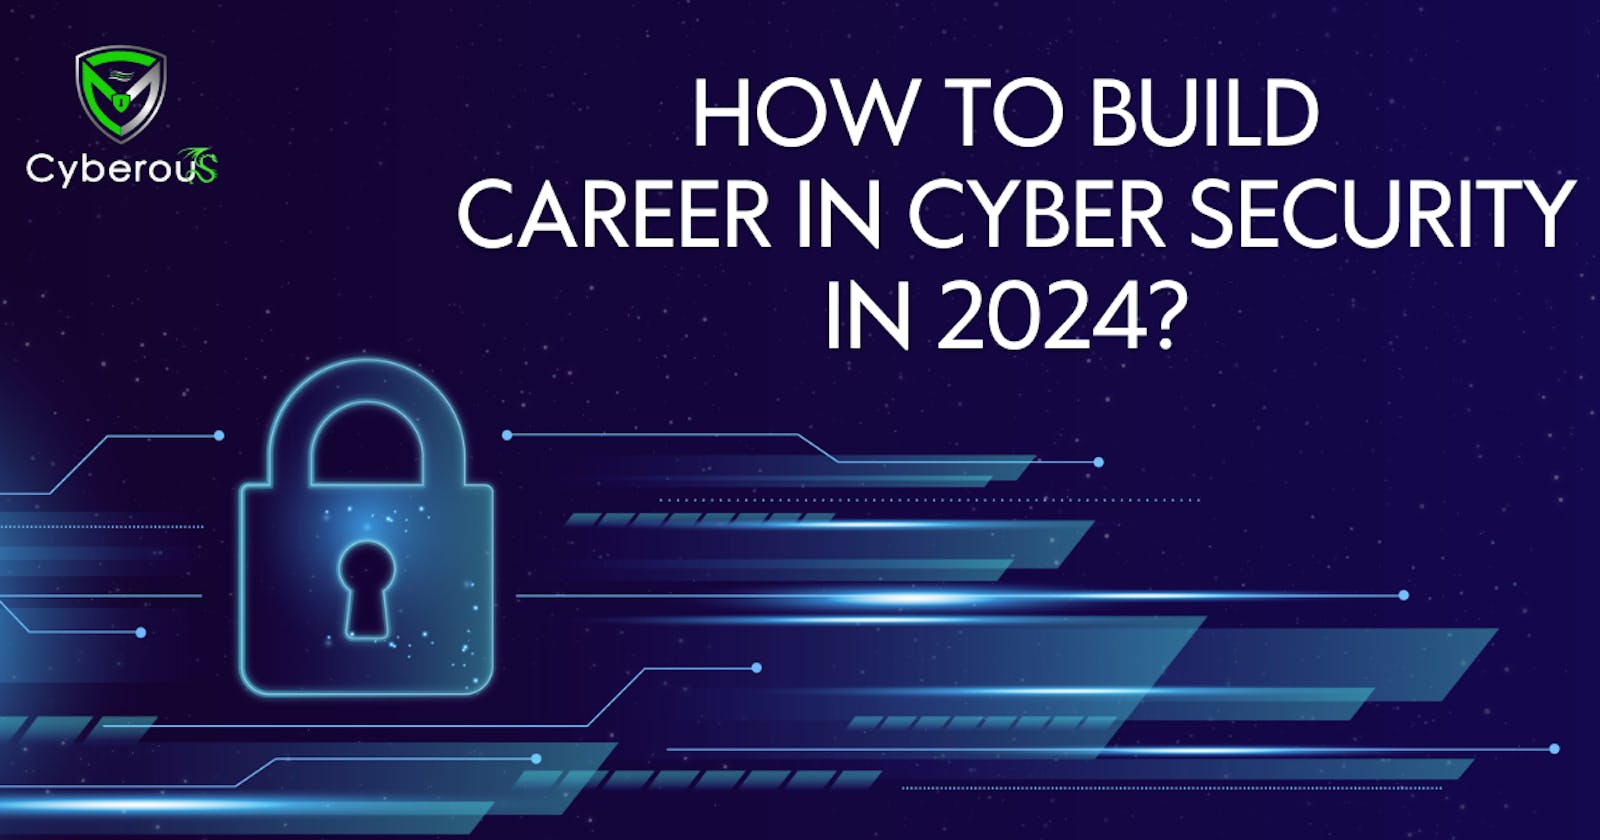 How to Build a Career in Cybersecurity in 2024?